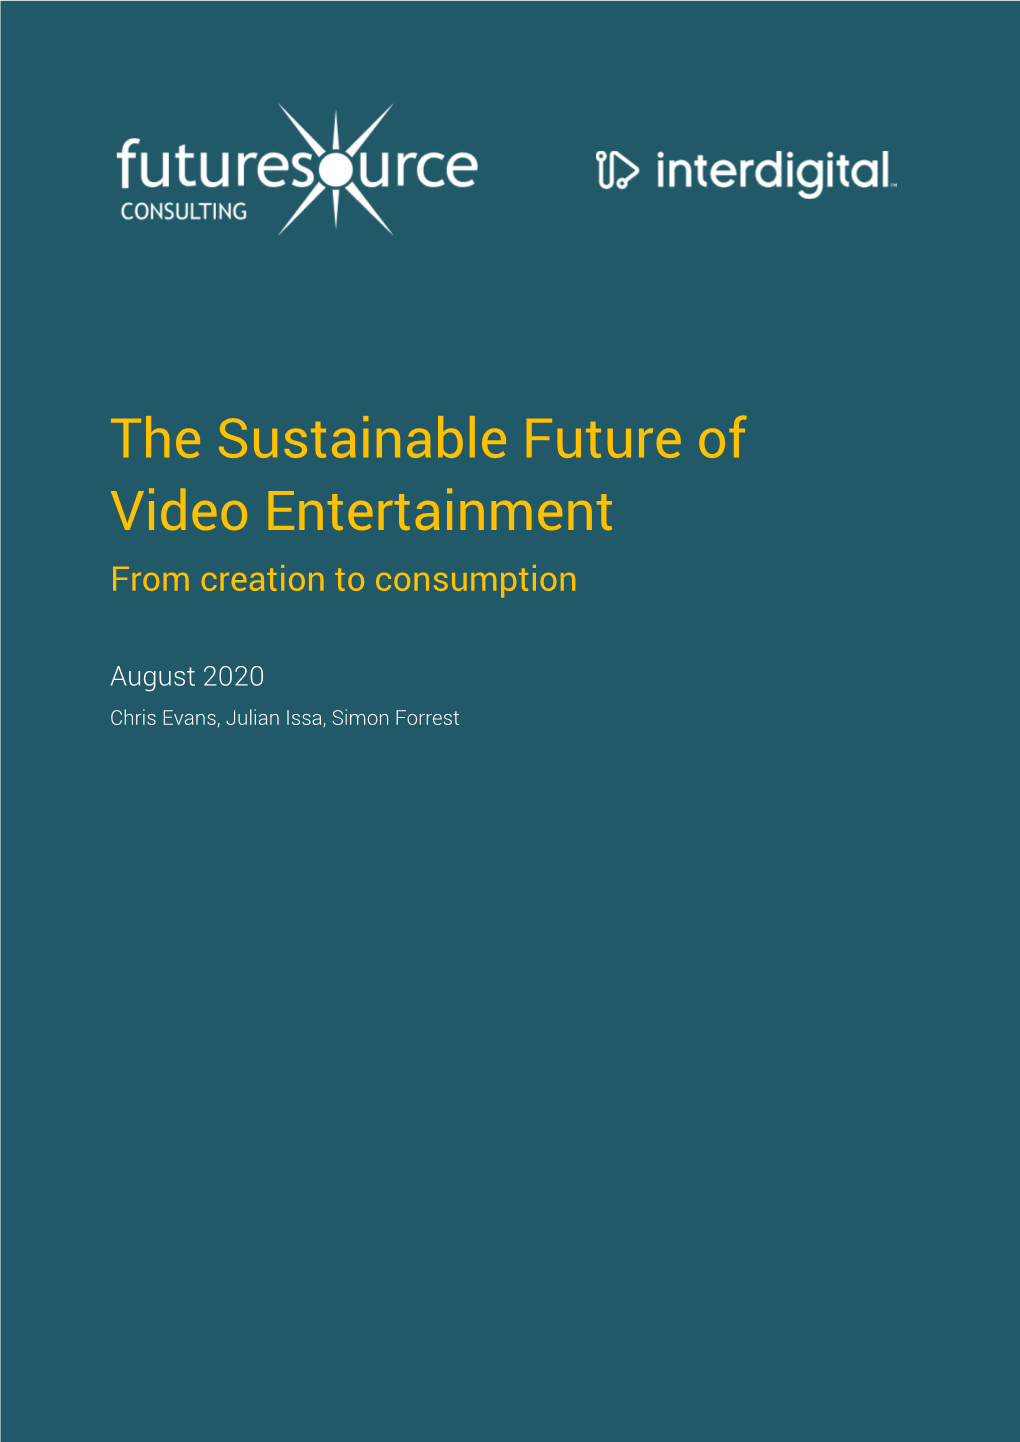 The Sustainable Future of Video Entertainment from Creation to Consumption